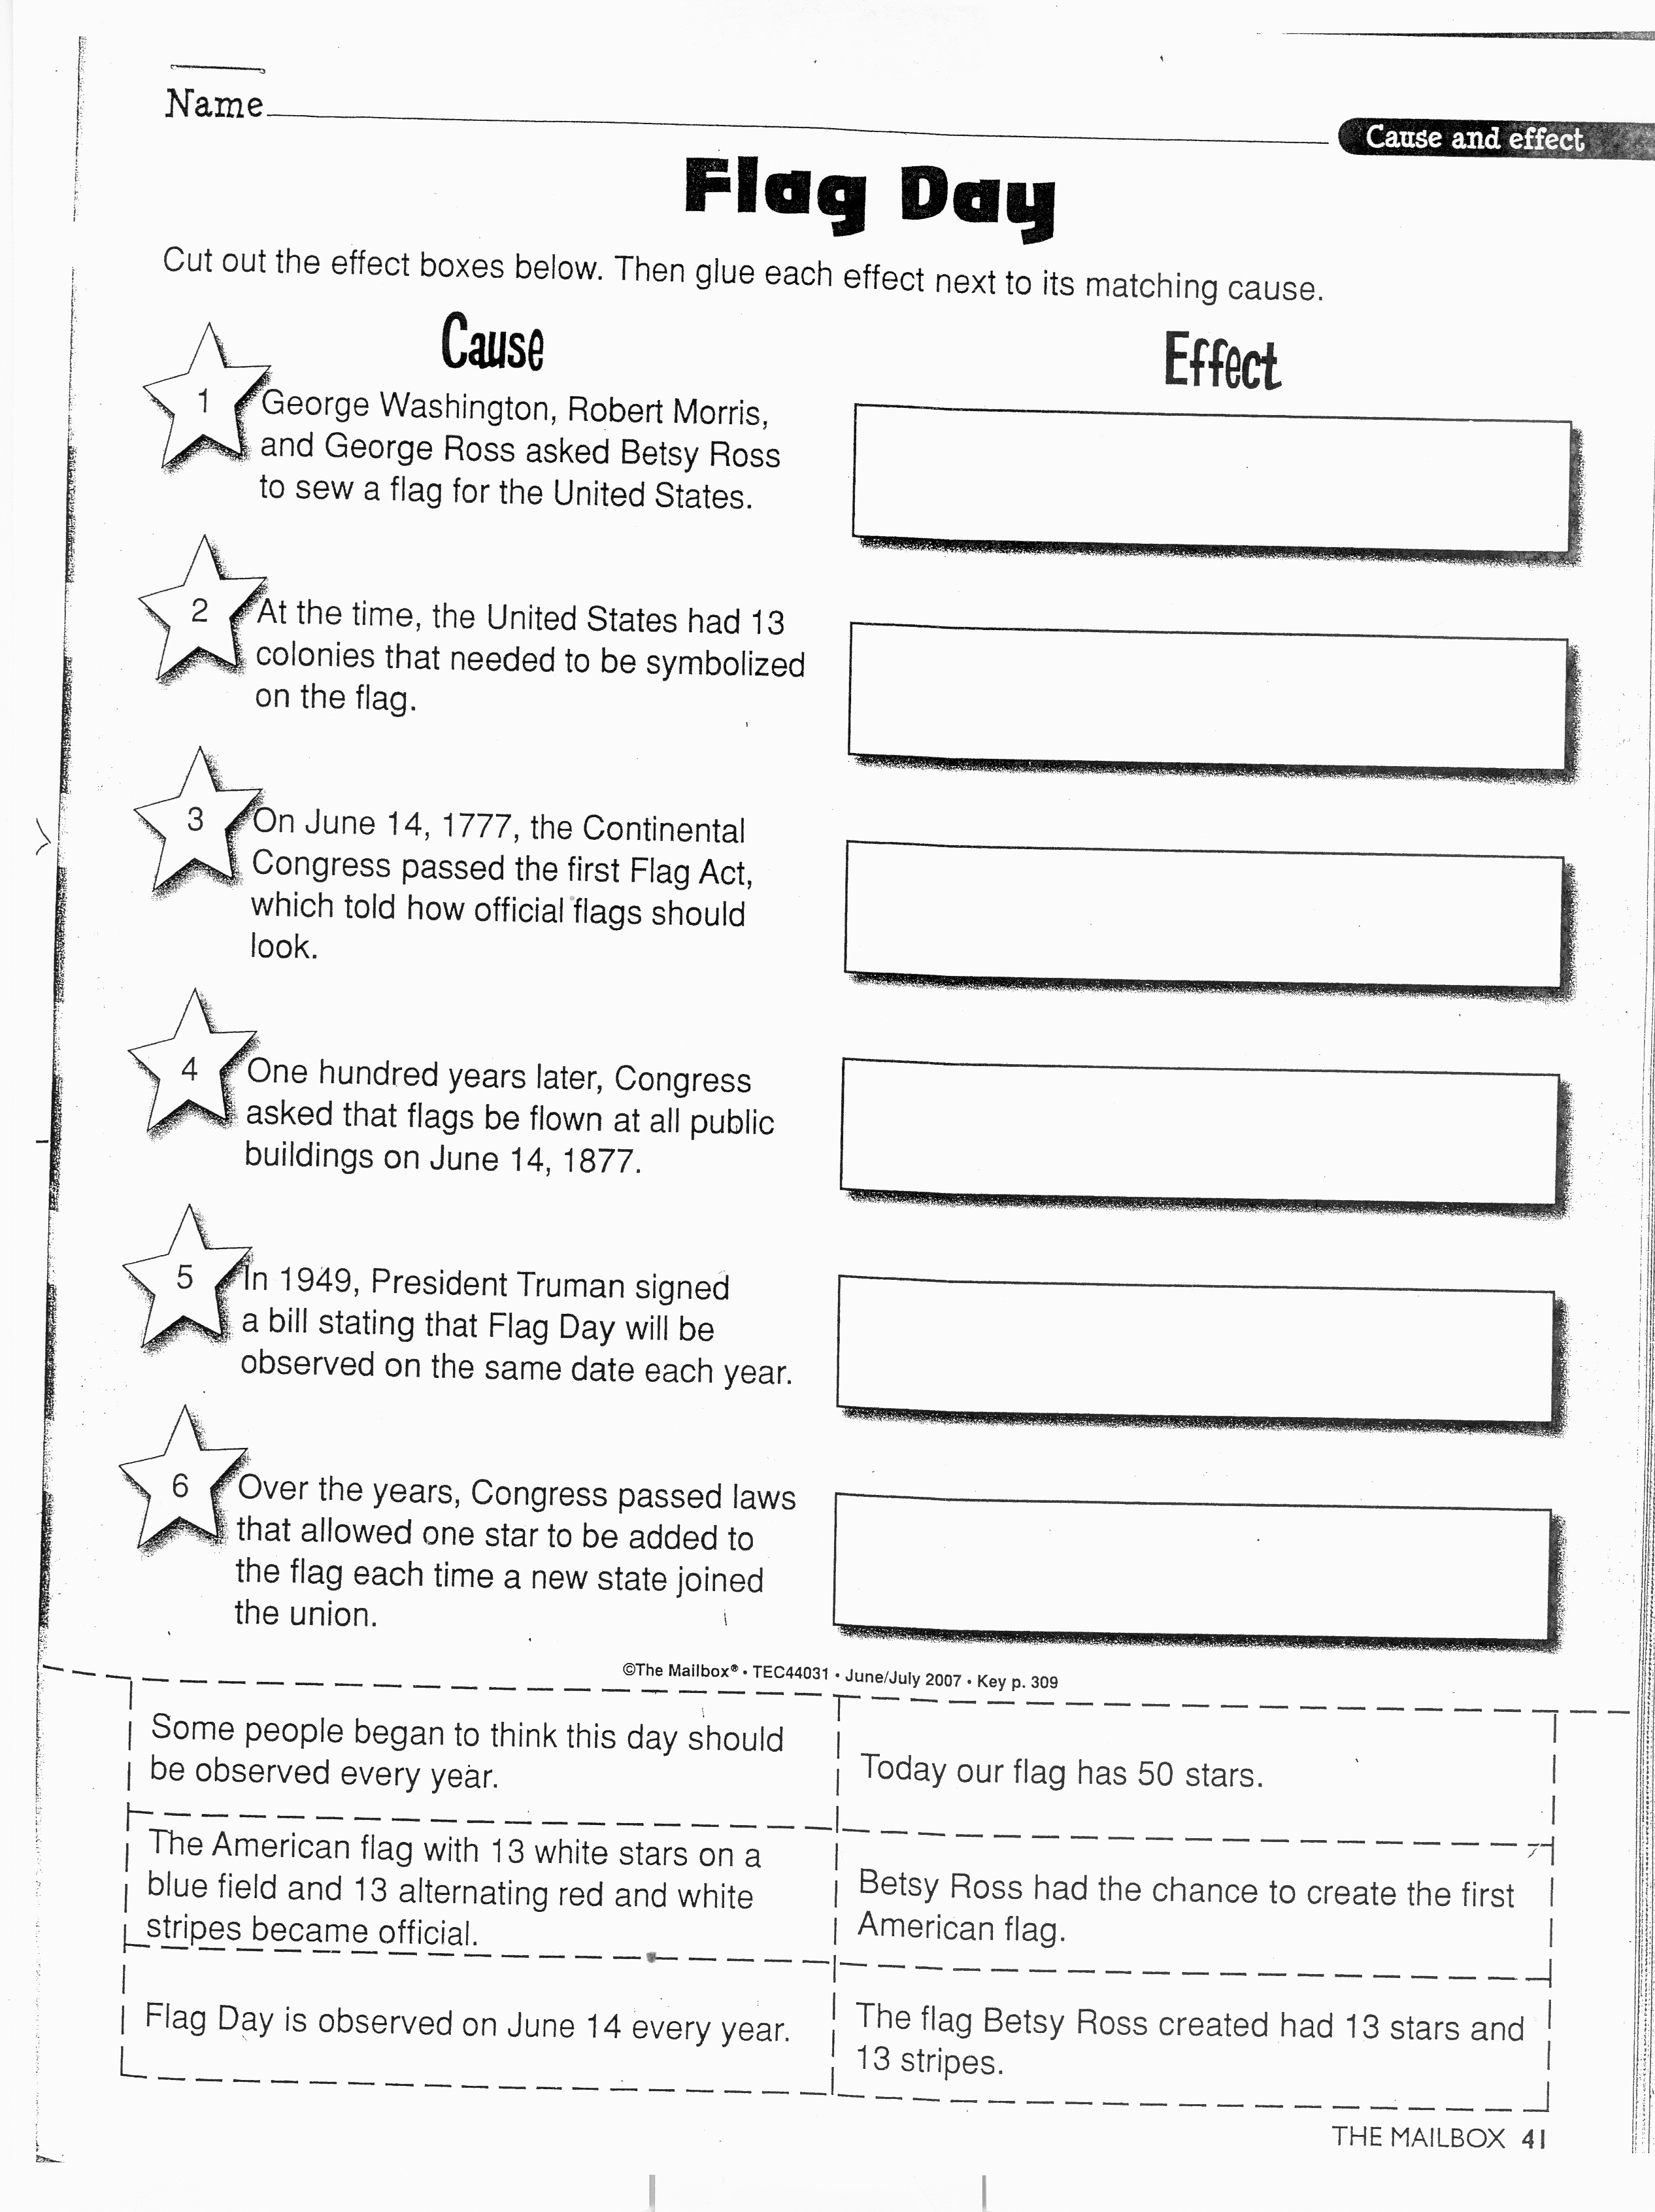 Language Arts Worksheets 8th Grade 6th Grade Lessons Middle School Language Arts Help